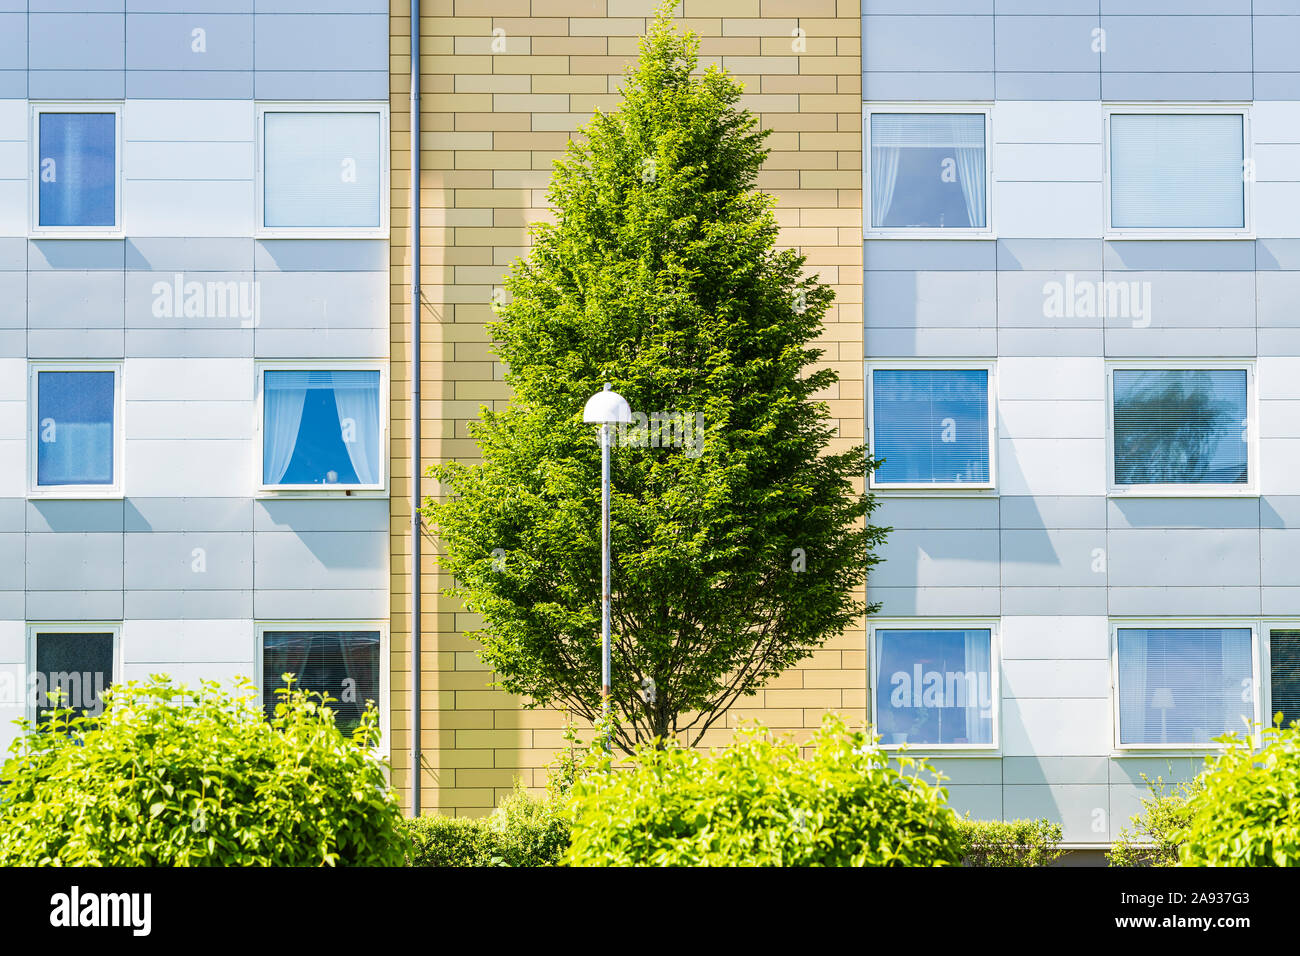 Tree in front of block of flats Stock Photo